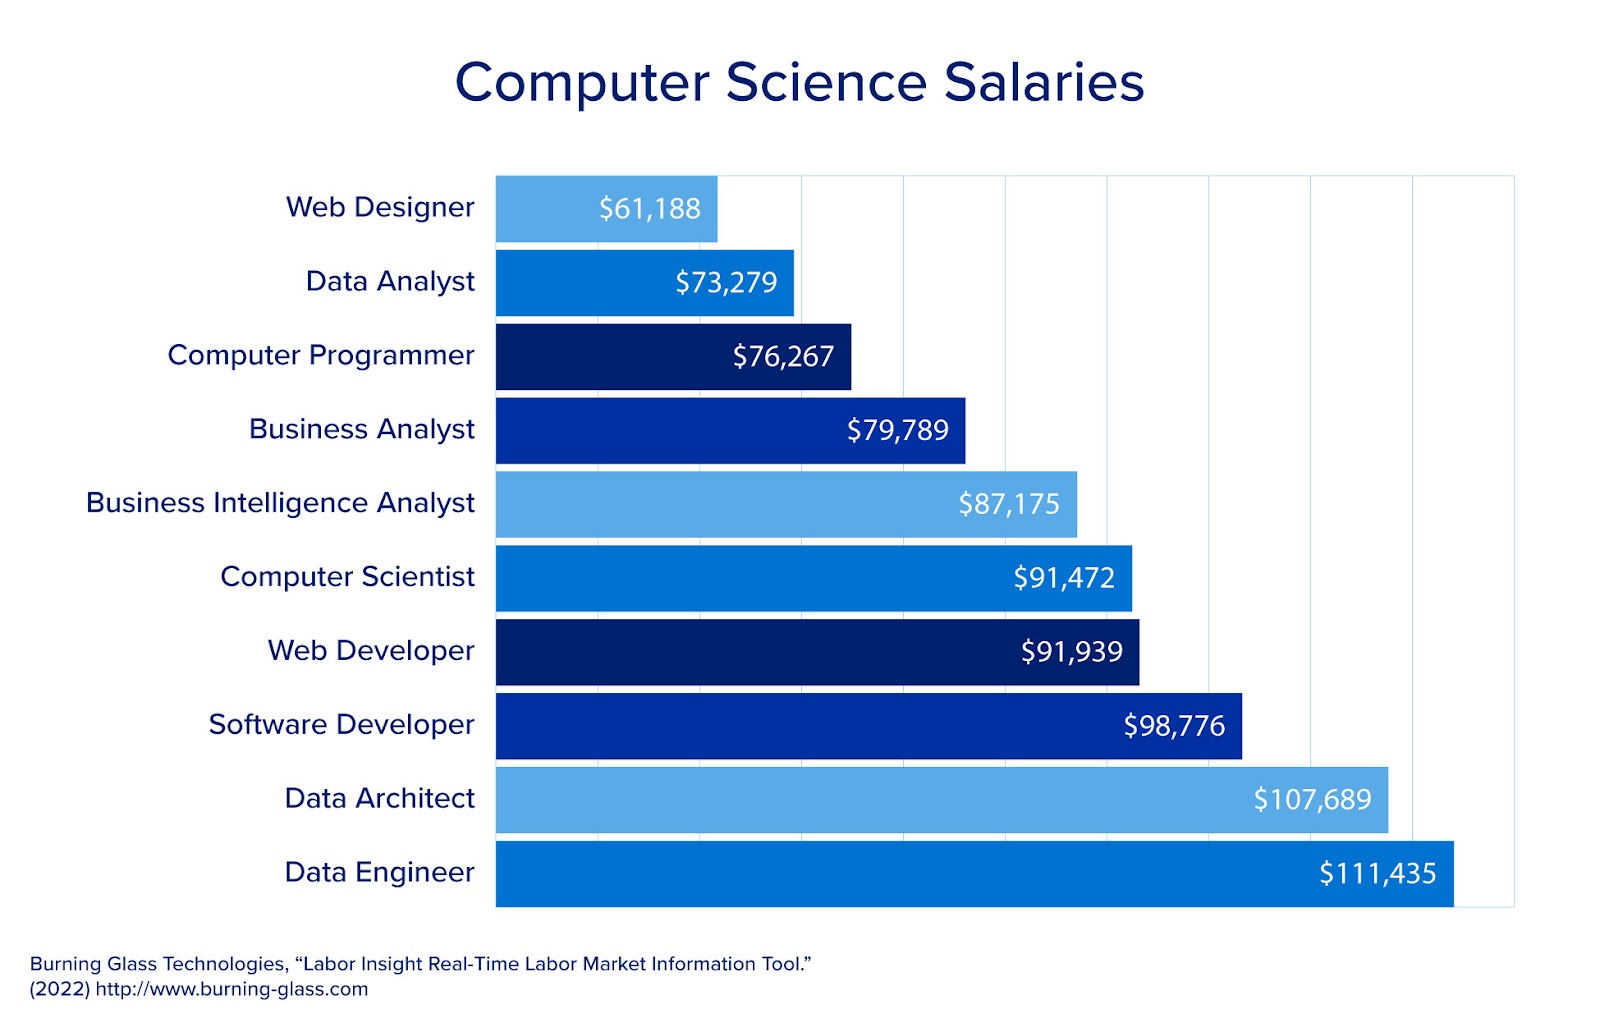 An image highlighting the various salaries of different positions within the computer science field.